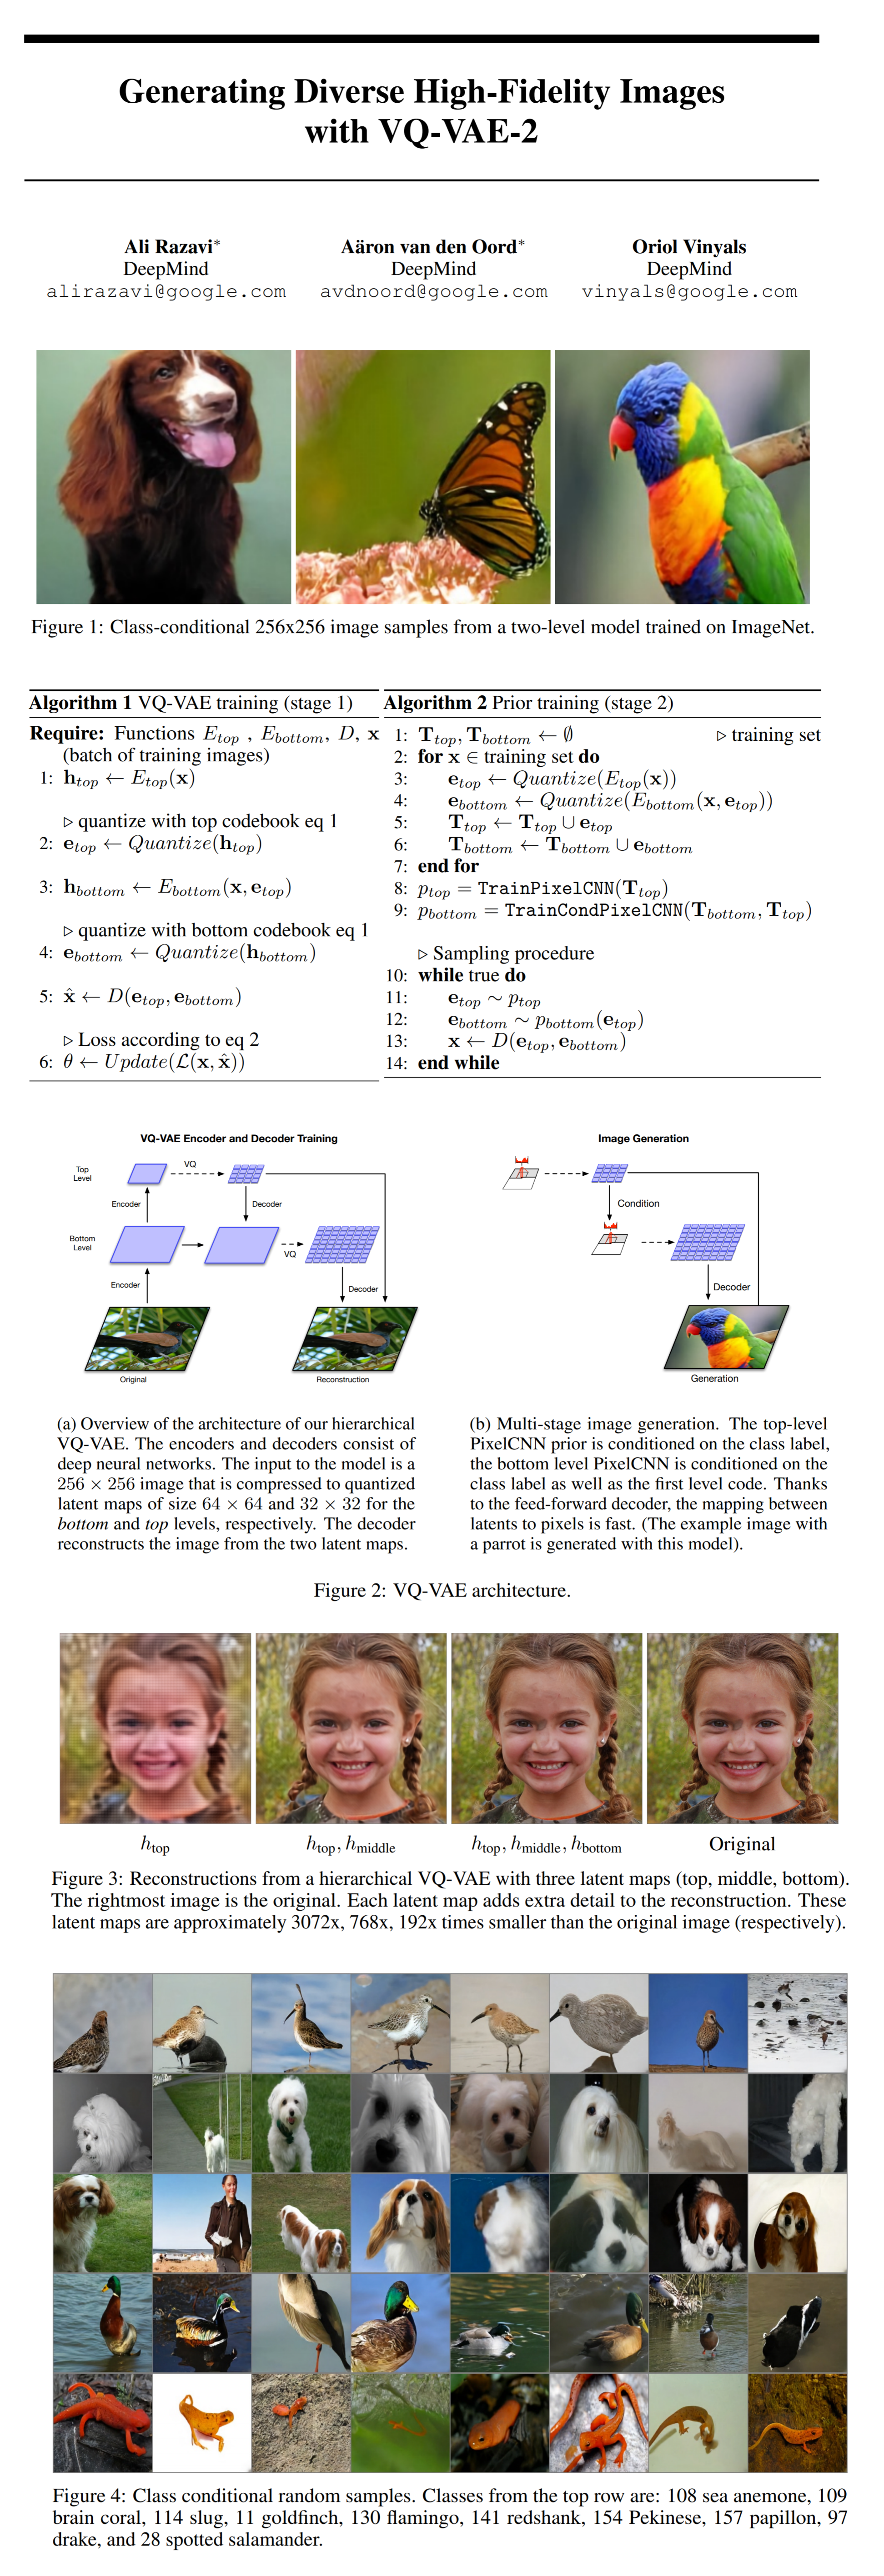 Generating Diverse High-Fidelity Images with VQ-VAE-2 Paper Poster